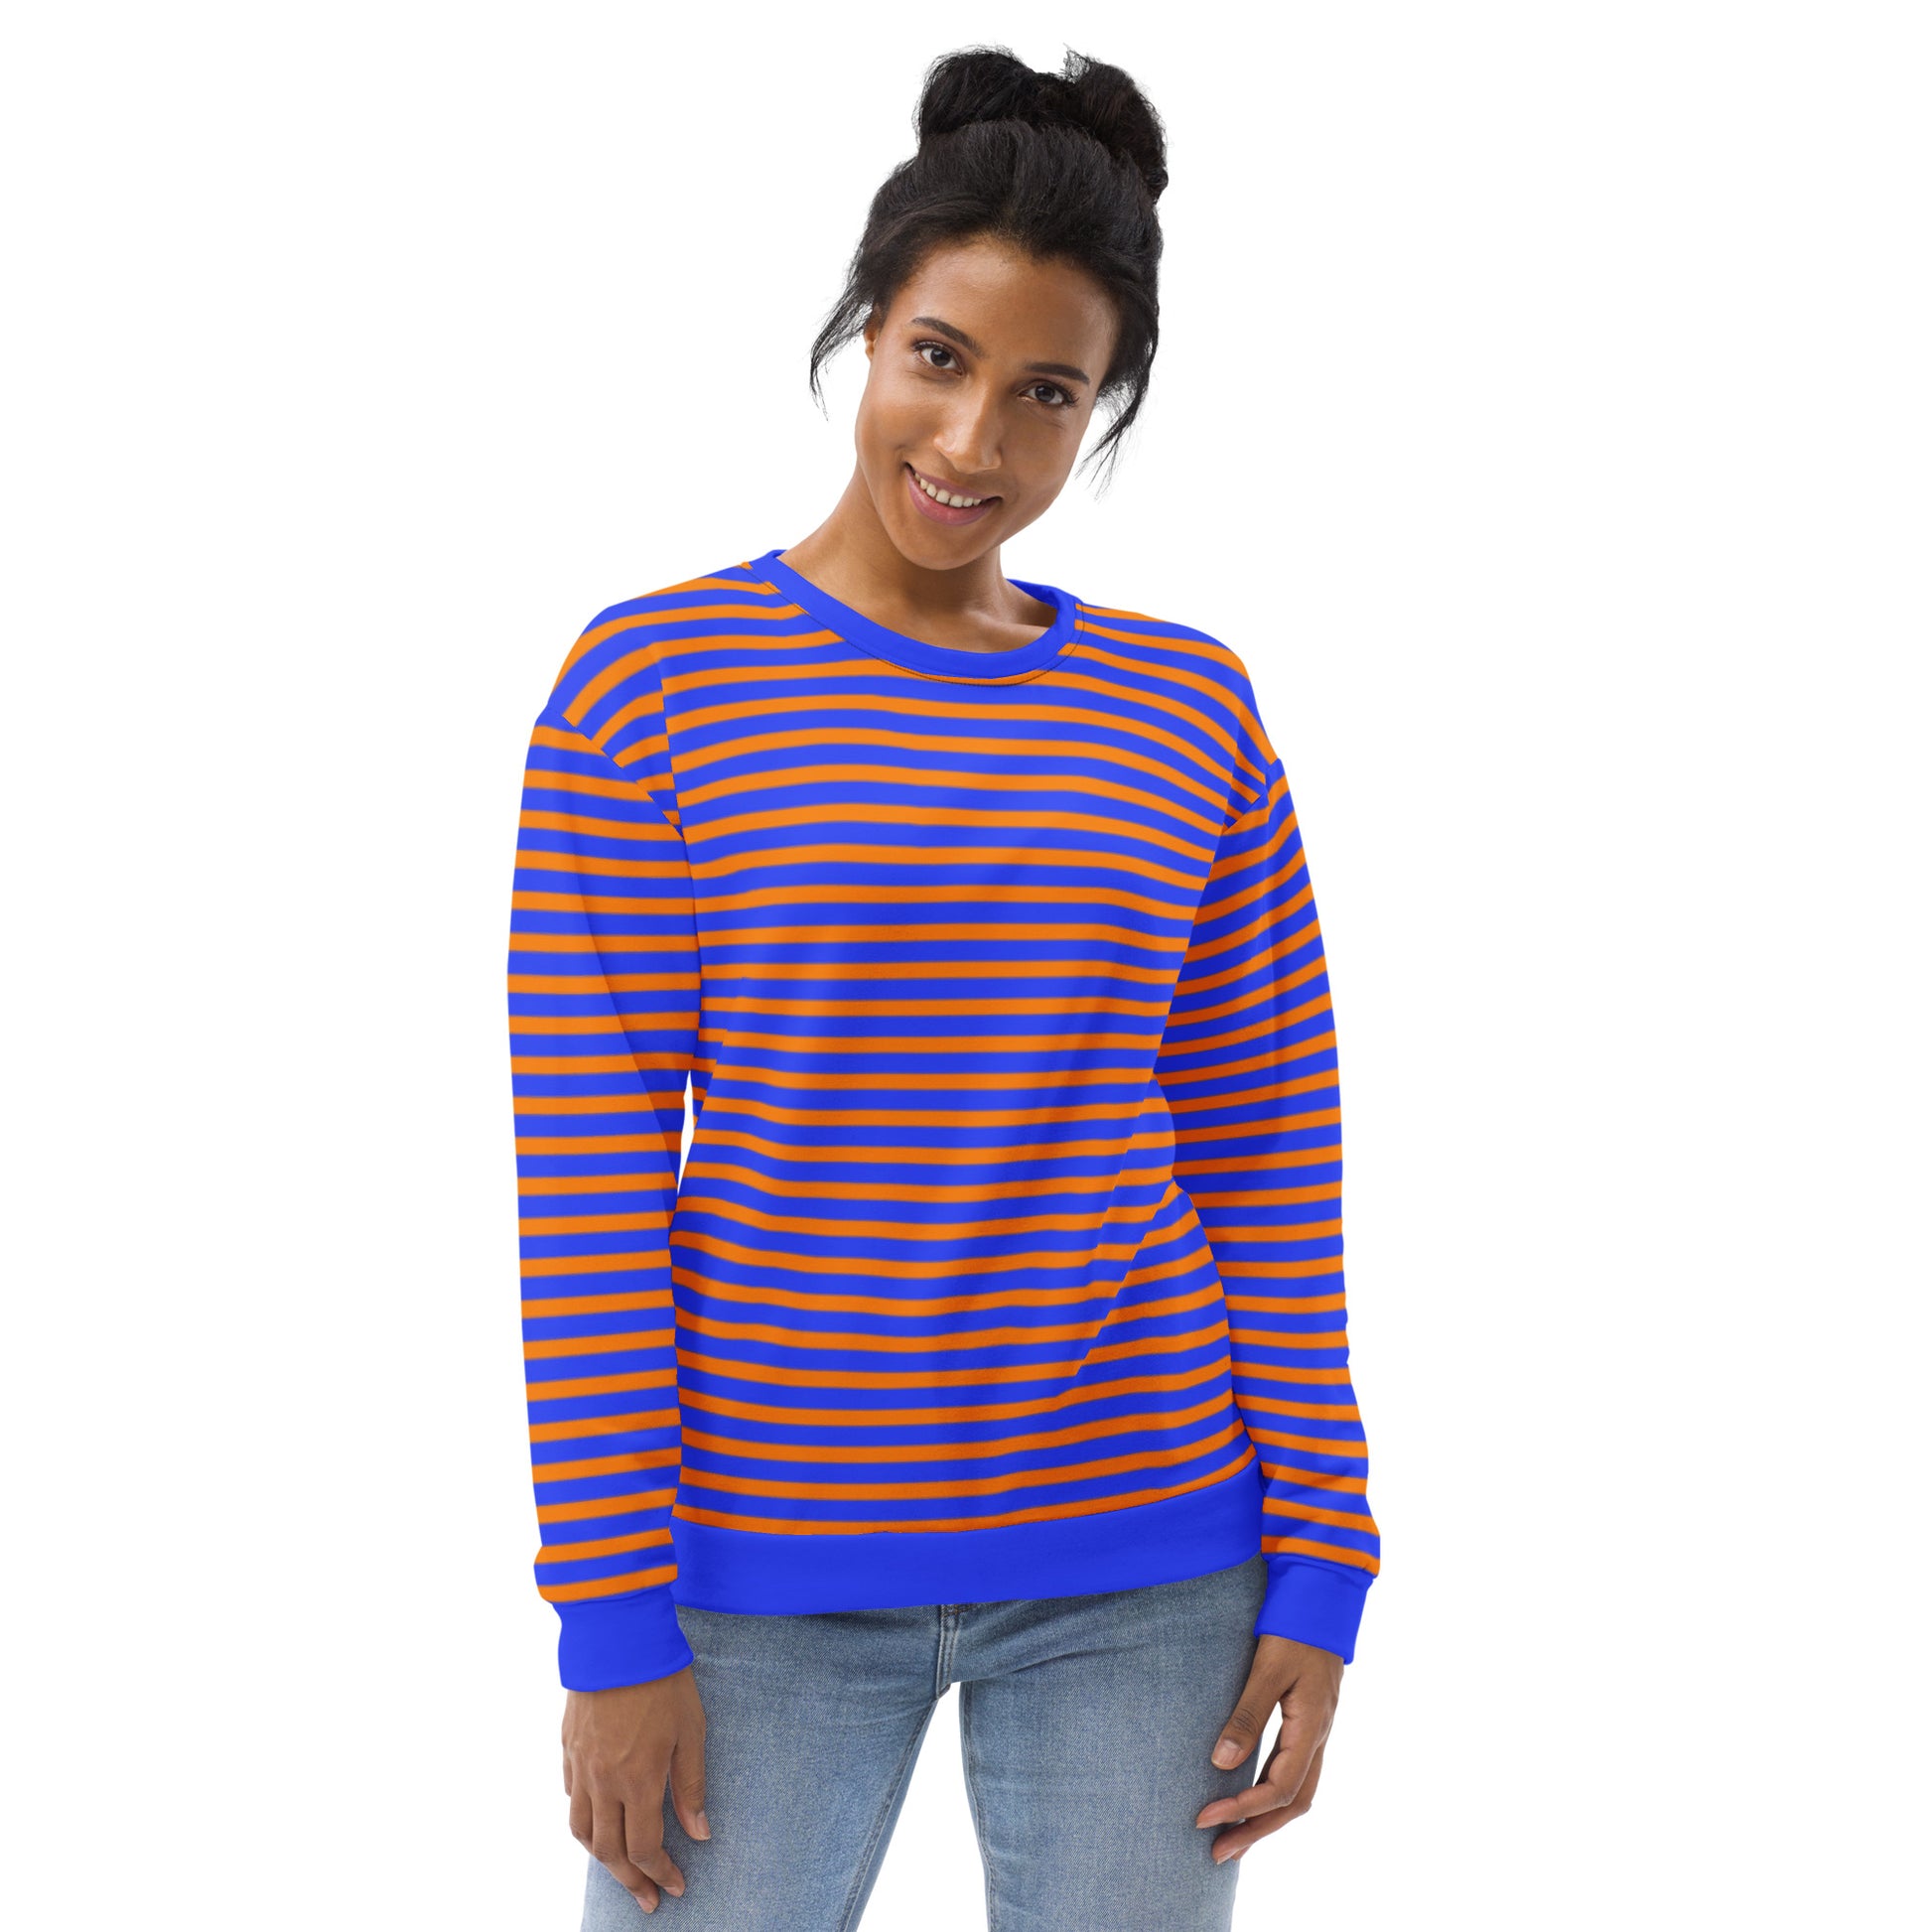 Blue And Orange Striped Sweater / Fashion For Men And Women